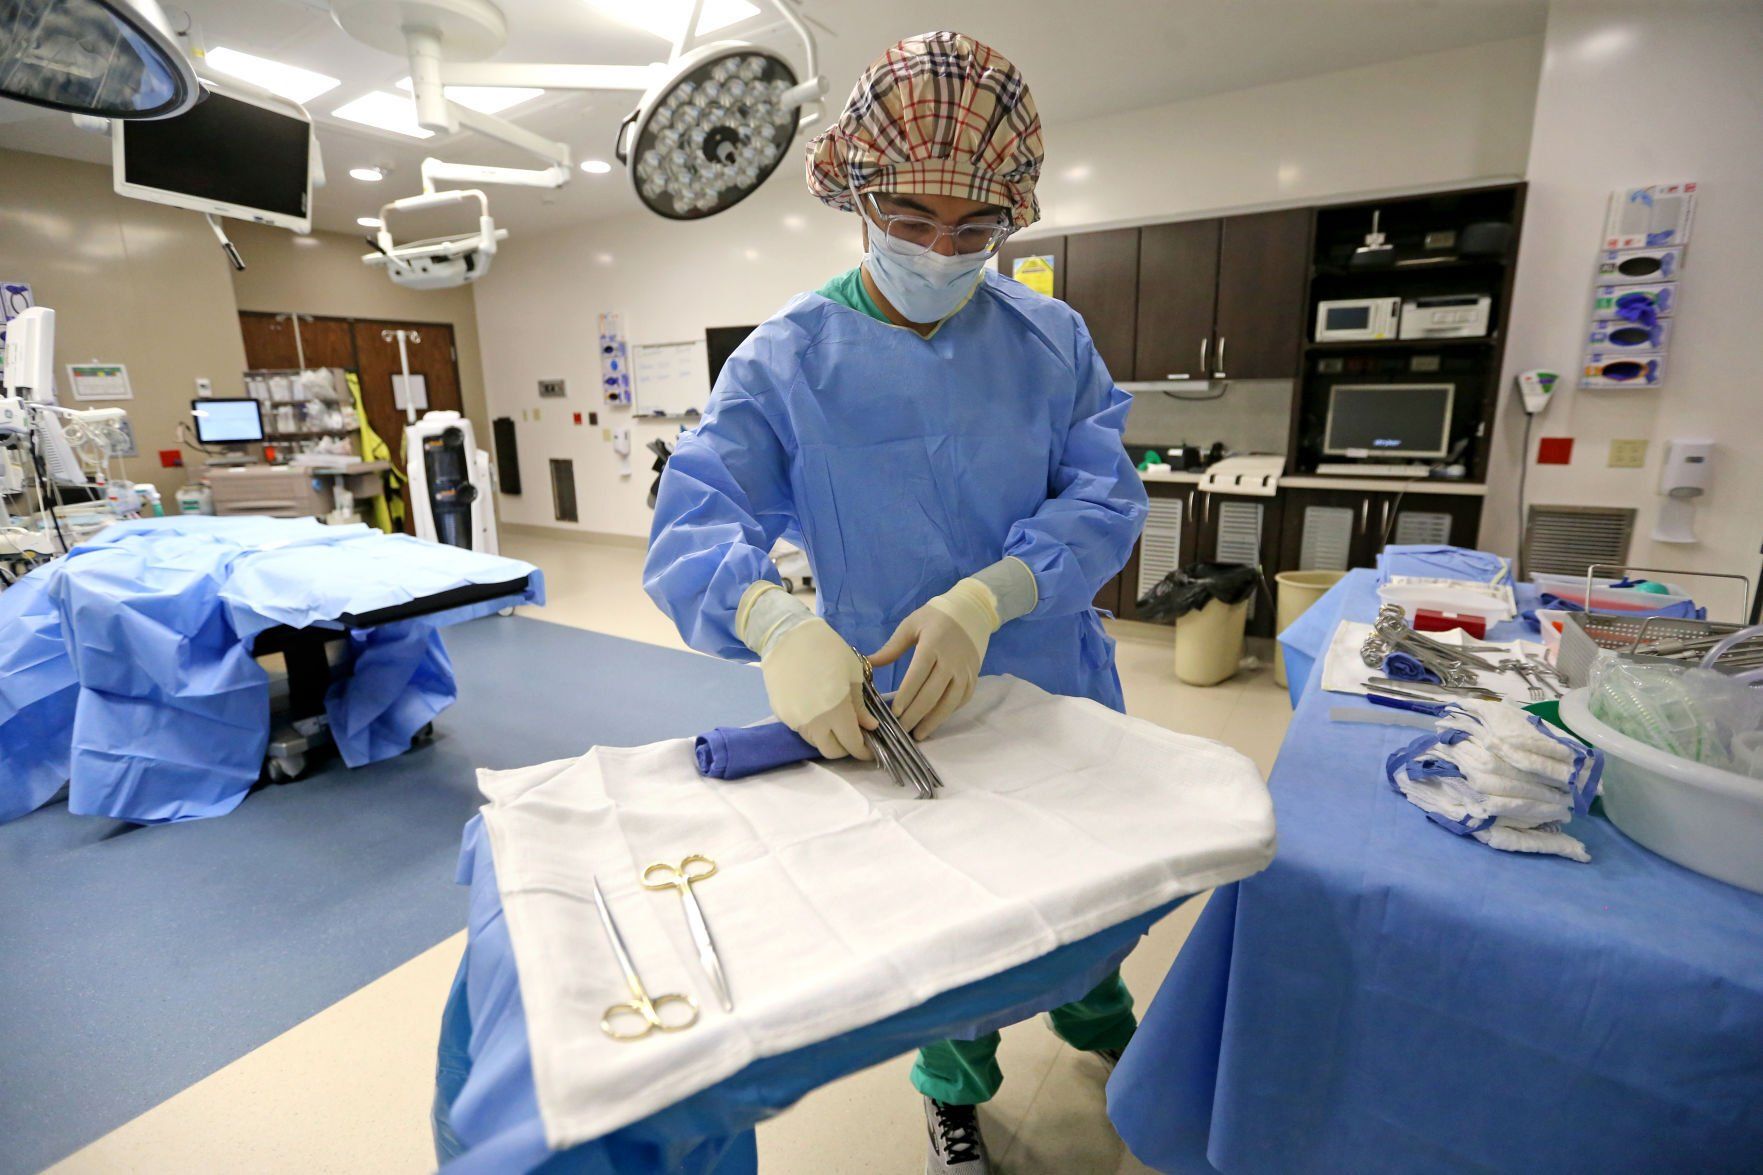 Jerry-Jordan Kane, a surgical technician at MercyOne Dubuque Medical Center, demonstrates how to prepare a mayo stand in an operating room at the hospital in Dubuque on Friday.    PHOTO CREDIT: JESSICA REILLY